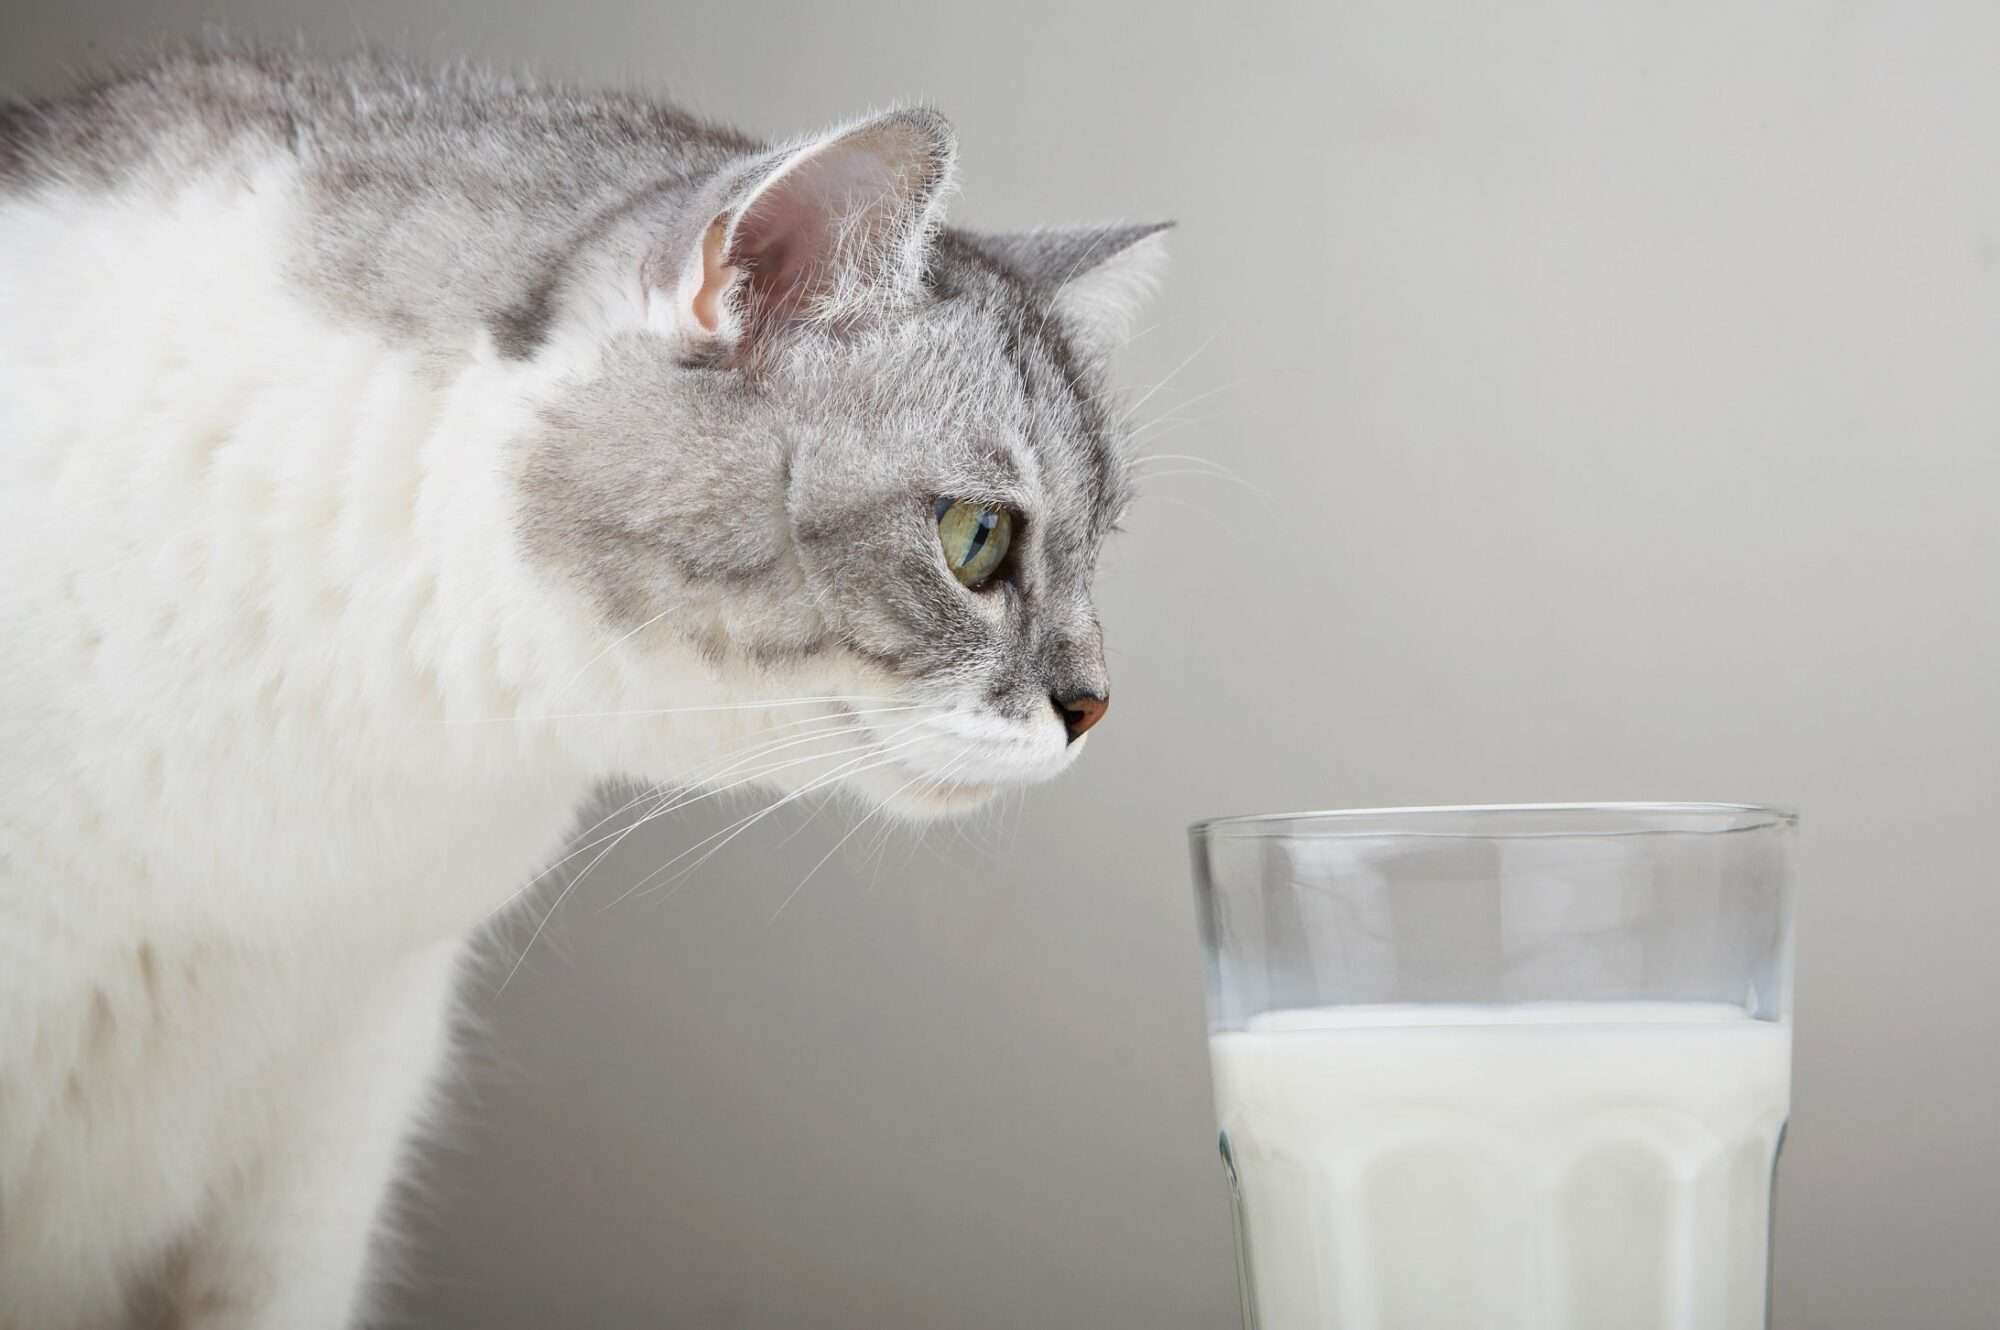 A cat checking out a glass of milk